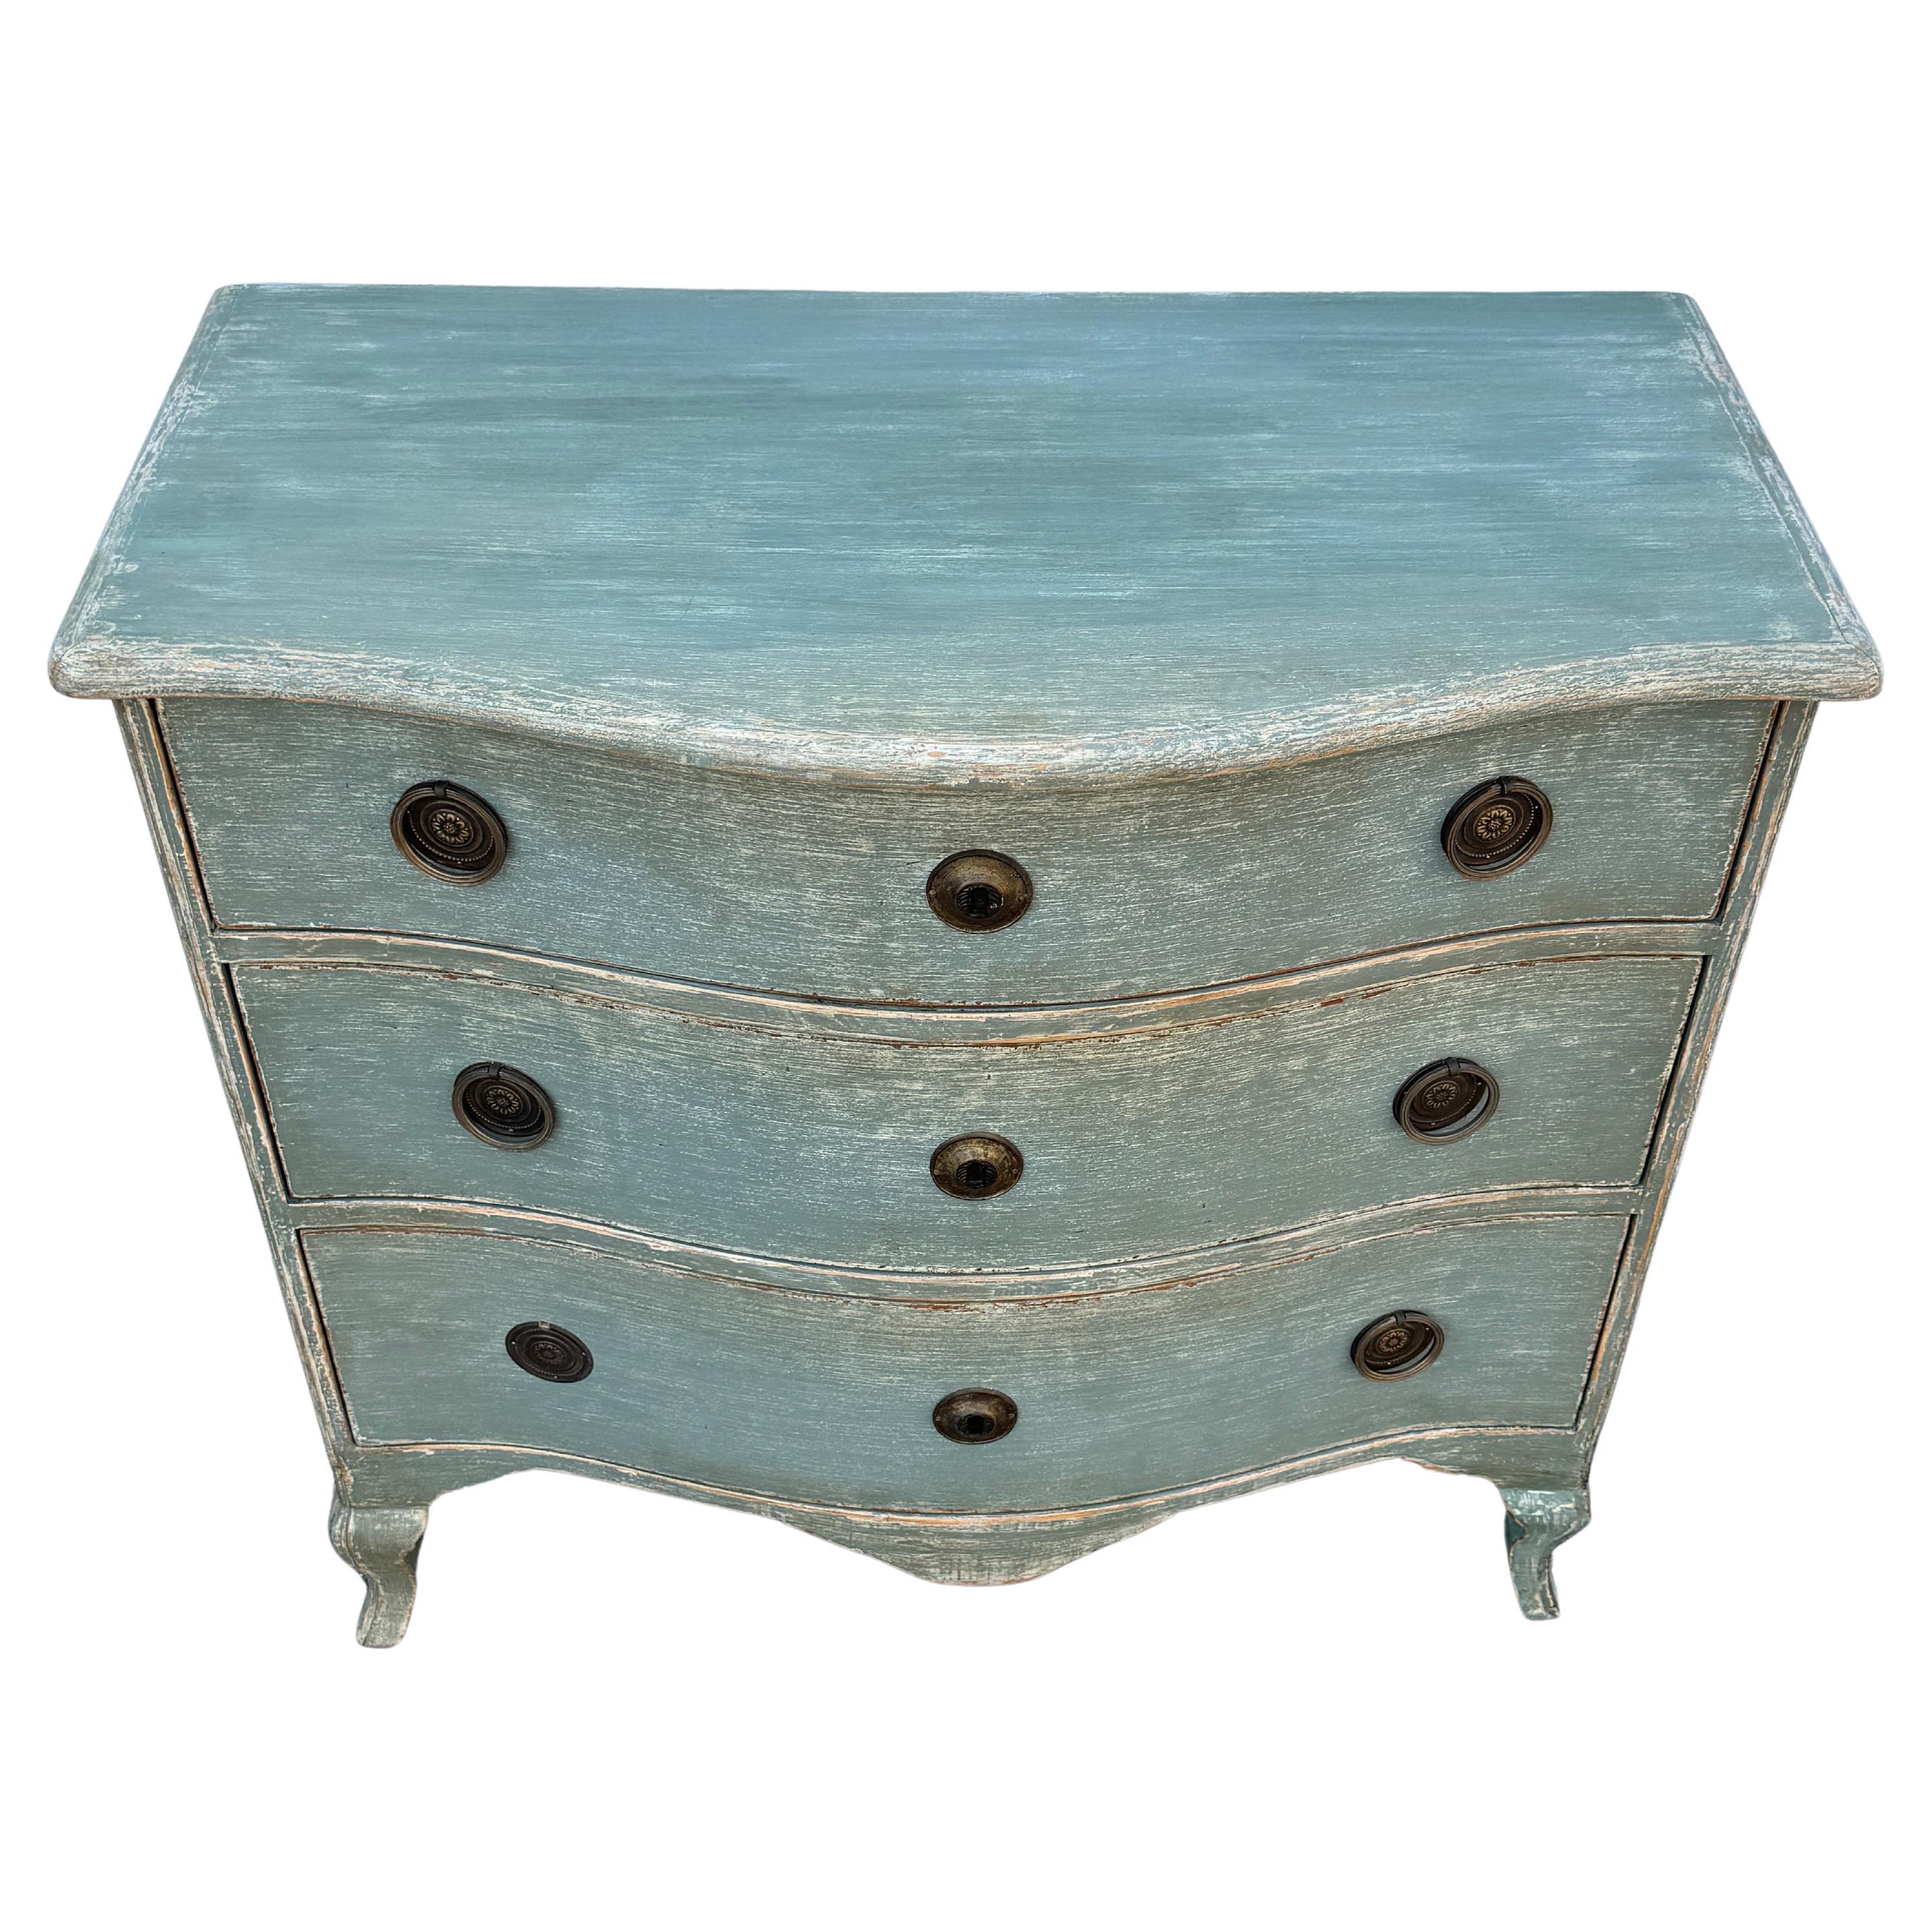 Small Swedish Gustavian Painted Commode or Chest of Drawers In Good Condition For Sale In Haddonfield, NJ